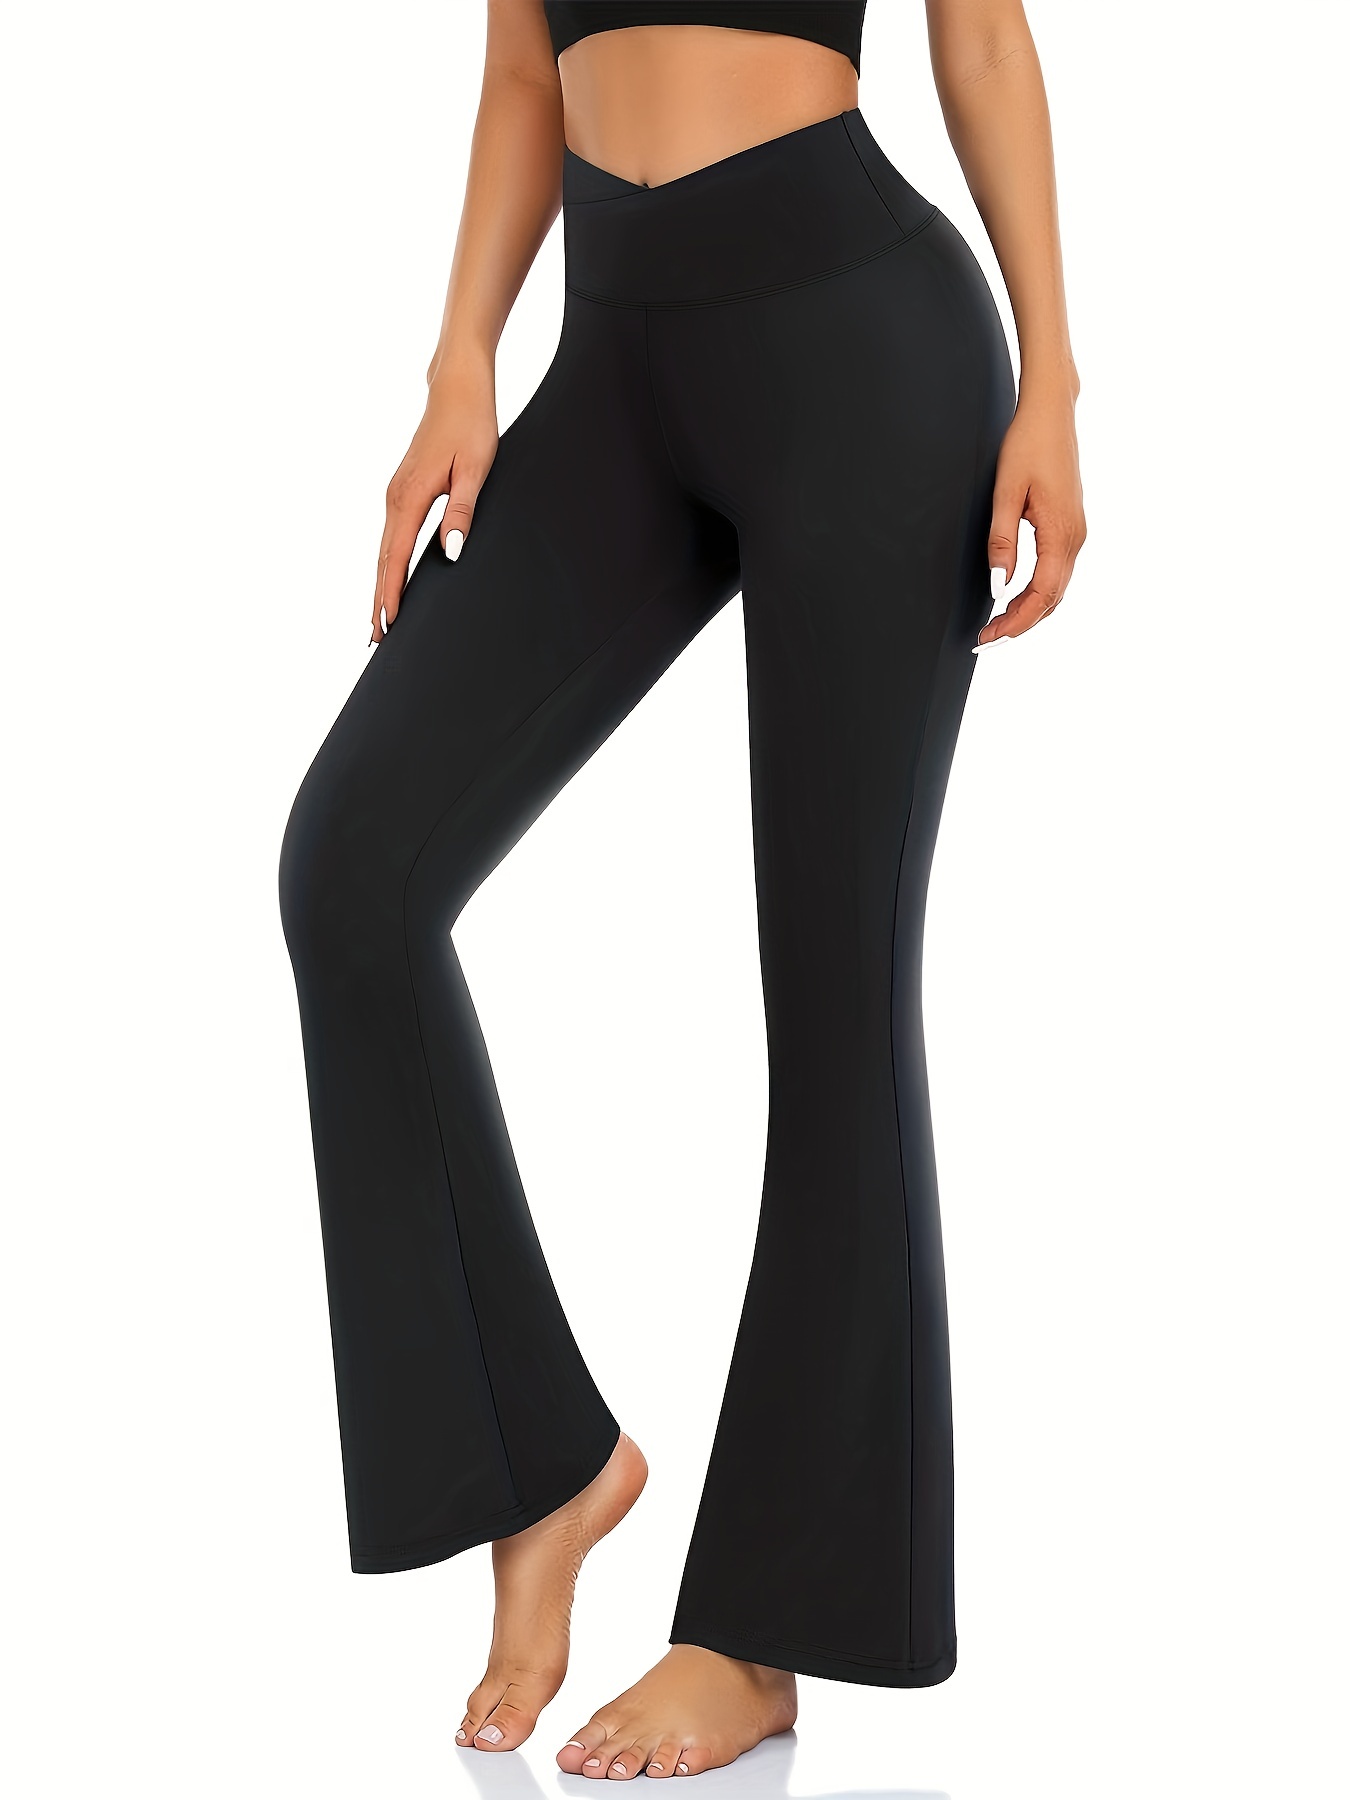 Flare Bottom Yoga Jumpsuits with Scrunch Butt Design • Value Yoga